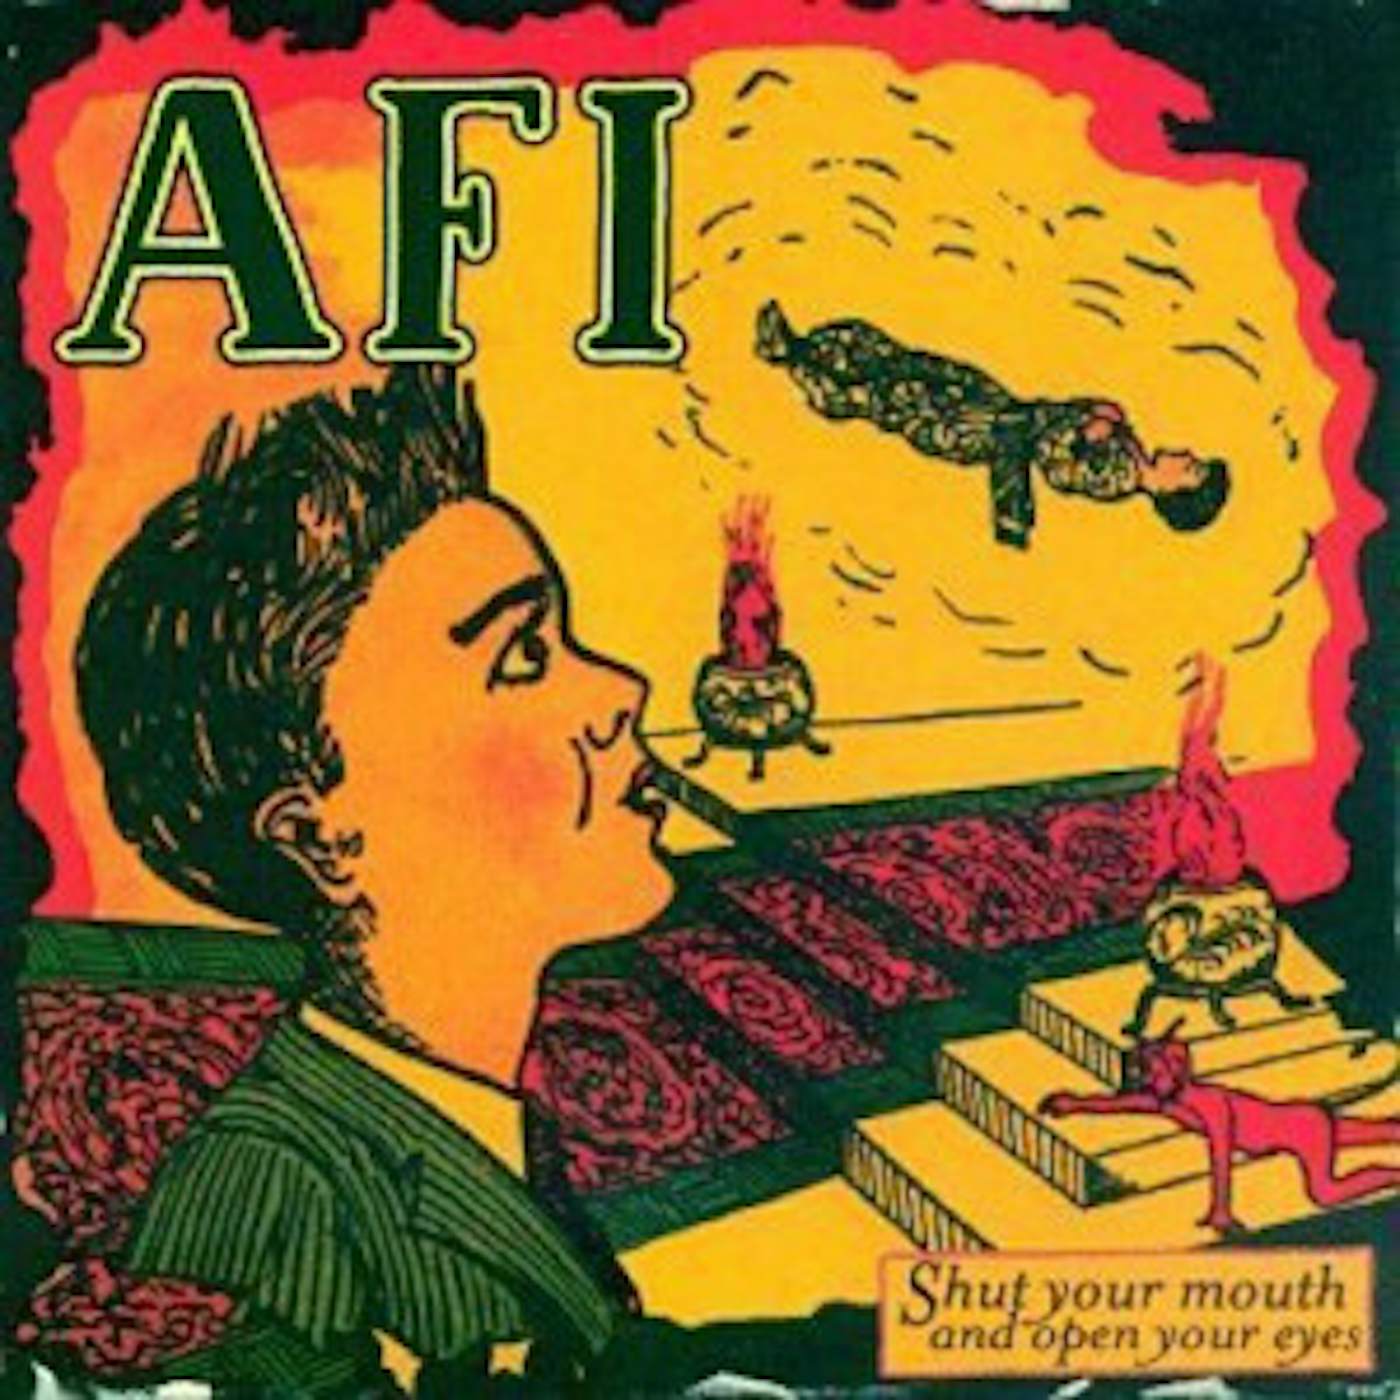 AFI Shut Your Mouth And Open Your Eyes Vinyl Record